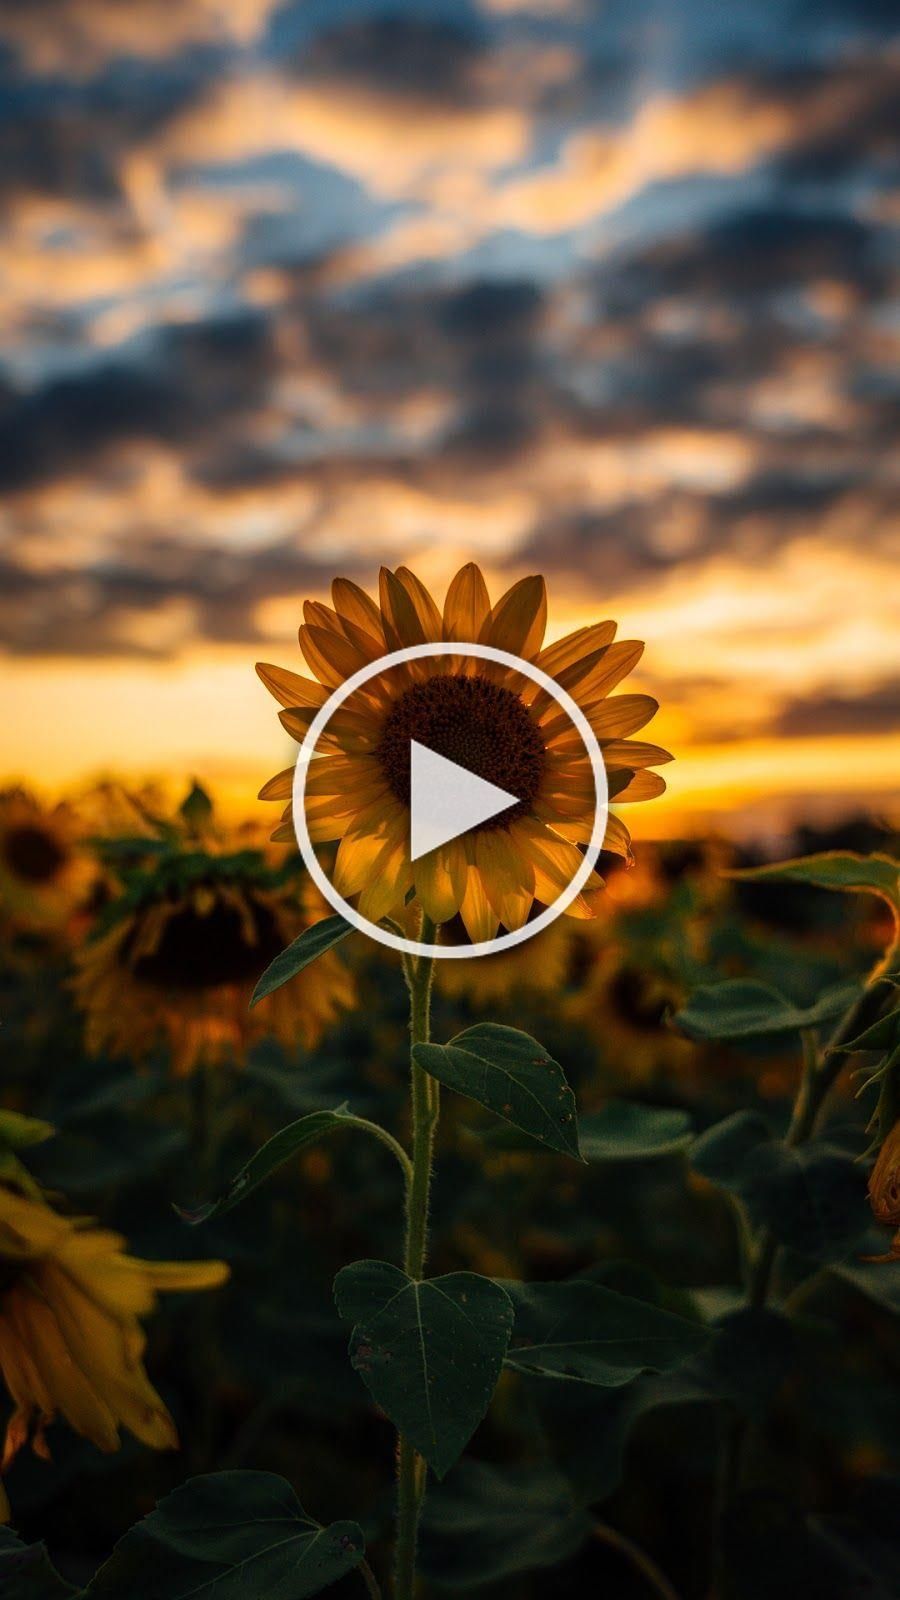 Sunflower Wallpaper Android - Sunflower Wallpaper For Android - HD Wallpaper 